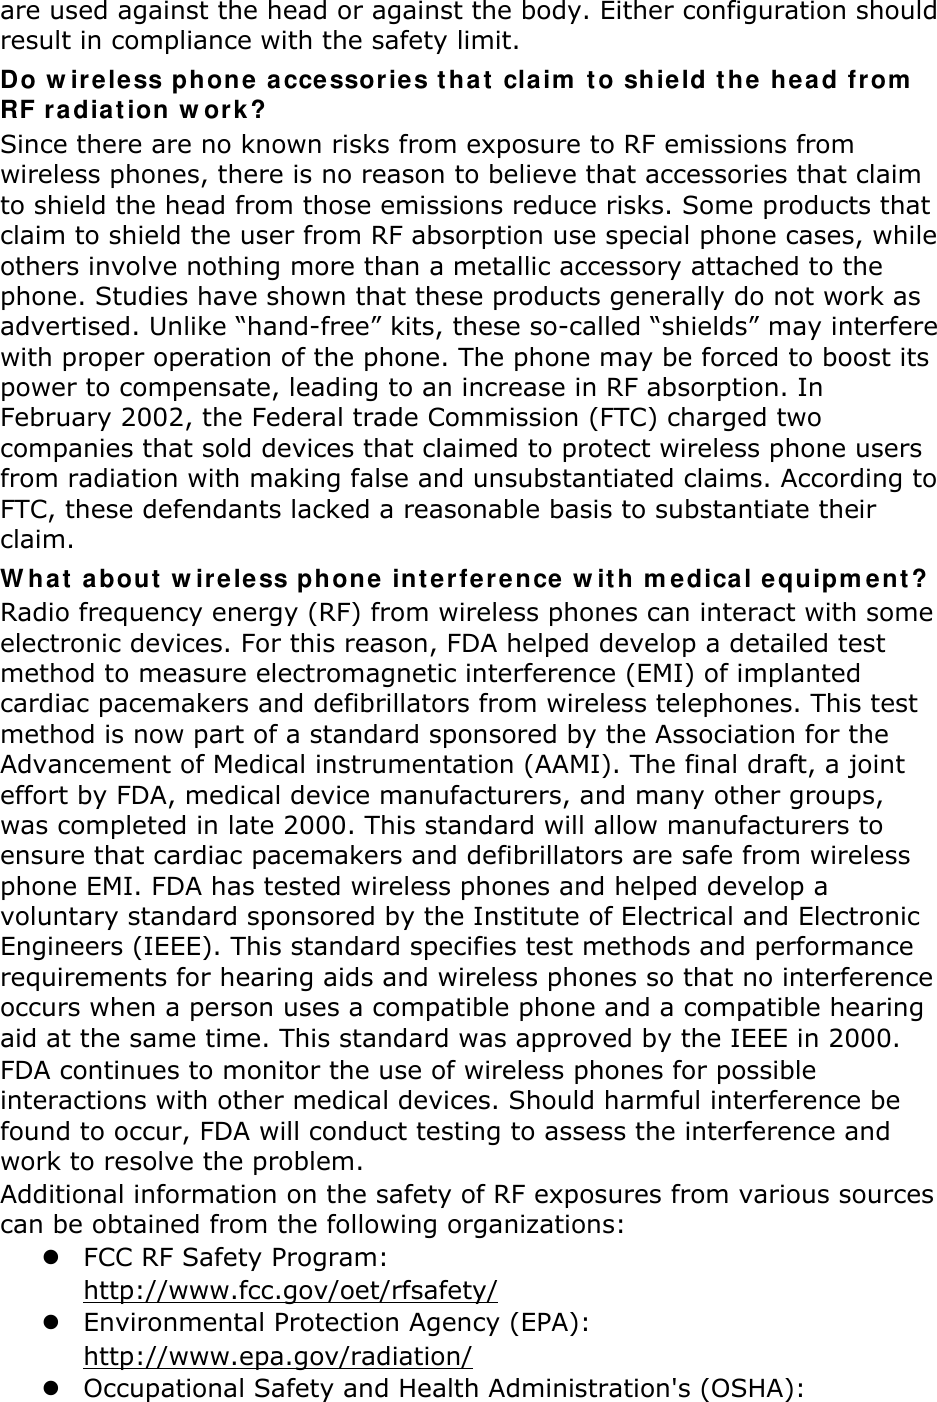 are used against the head or against the body. Either configuration should result in compliance with the safety limit. Do w ireless phone a ccessor ies t ha t  cla im  t o shield t he head fr om  RF ra diation w ork? Since there are no known risks from exposure to RF emissions from wireless phones, there is no reason to believe that accessories that claim to shield the head from those emissions reduce risks. Some products that claim to shield the user from RF absorption use special phone cases, while others involve nothing more than a metallic accessory attached to the phone. Studies have shown that these products generally do not work as advertised. Unlike “hand-free” kits, these so-called “shields” may interfere with proper operation of the phone. The phone may be forced to boost its power to compensate, leading to an increase in RF absorption. In February 2002, the Federal trade Commission (FTC) charged two companies that sold devices that claimed to protect wireless phone users from radiation with making false and unsubstantiated claims. According to FTC, these defendants lacked a reasonable basis to substantiate their claim. W ha t  about  w ire less phone interference w ith m edical equipm ent ? Radio frequency energy (RF) from wireless phones can interact with some electronic devices. For this reason, FDA helped develop a detailed test method to measure electromagnetic interference (EMI) of implanted cardiac pacemakers and defibrillators from wireless telephones. This test method is now part of a standard sponsored by the Association for the Advancement of Medical instrumentation (AAMI). The final draft, a joint effort by FDA, medical device manufacturers, and many other groups, was completed in late 2000. This standard will allow manufacturers to ensure that cardiac pacemakers and defibrillators are safe from wireless phone EMI. FDA has tested wireless phones and helped develop a voluntary standard sponsored by the Institute of Electrical and Electronic Engineers (IEEE). This standard specifies test methods and performance requirements for hearing aids and wireless phones so that no interference occurs when a person uses a compatible phone and a compatible hearing aid at the same time. This standard was approved by the IEEE in 2000. FDA continues to monitor the use of wireless phones for possible interactions with other medical devices. Should harmful interference be found to occur, FDA will conduct testing to assess the interference and work to resolve the problem. Additional information on the safety of RF exposures from various sources can be obtained from the following organizations: z FCC RF Safety Program:   http://www.fcc.gov/oet/rfsafety/ z Environmental Protection Agency (EPA):   http://www.epa.gov/radiation/ z Occupational Safety and Health Administration&apos;s (OSHA):   